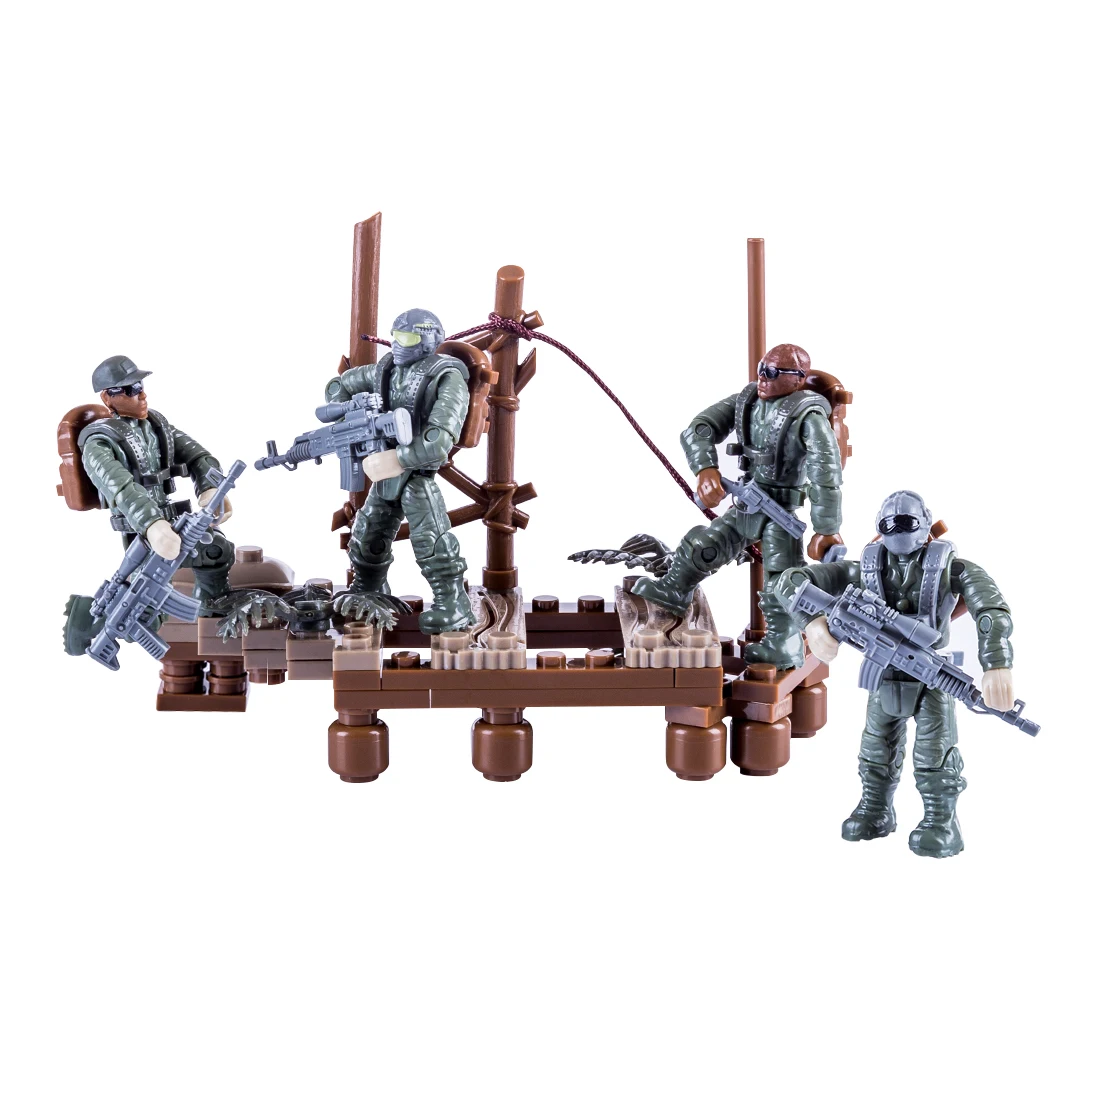 

Mini Figurines Toy Military Series Crossing Swamp Mini Particle Building Block People Figurines Toys for Children Christmas Gift